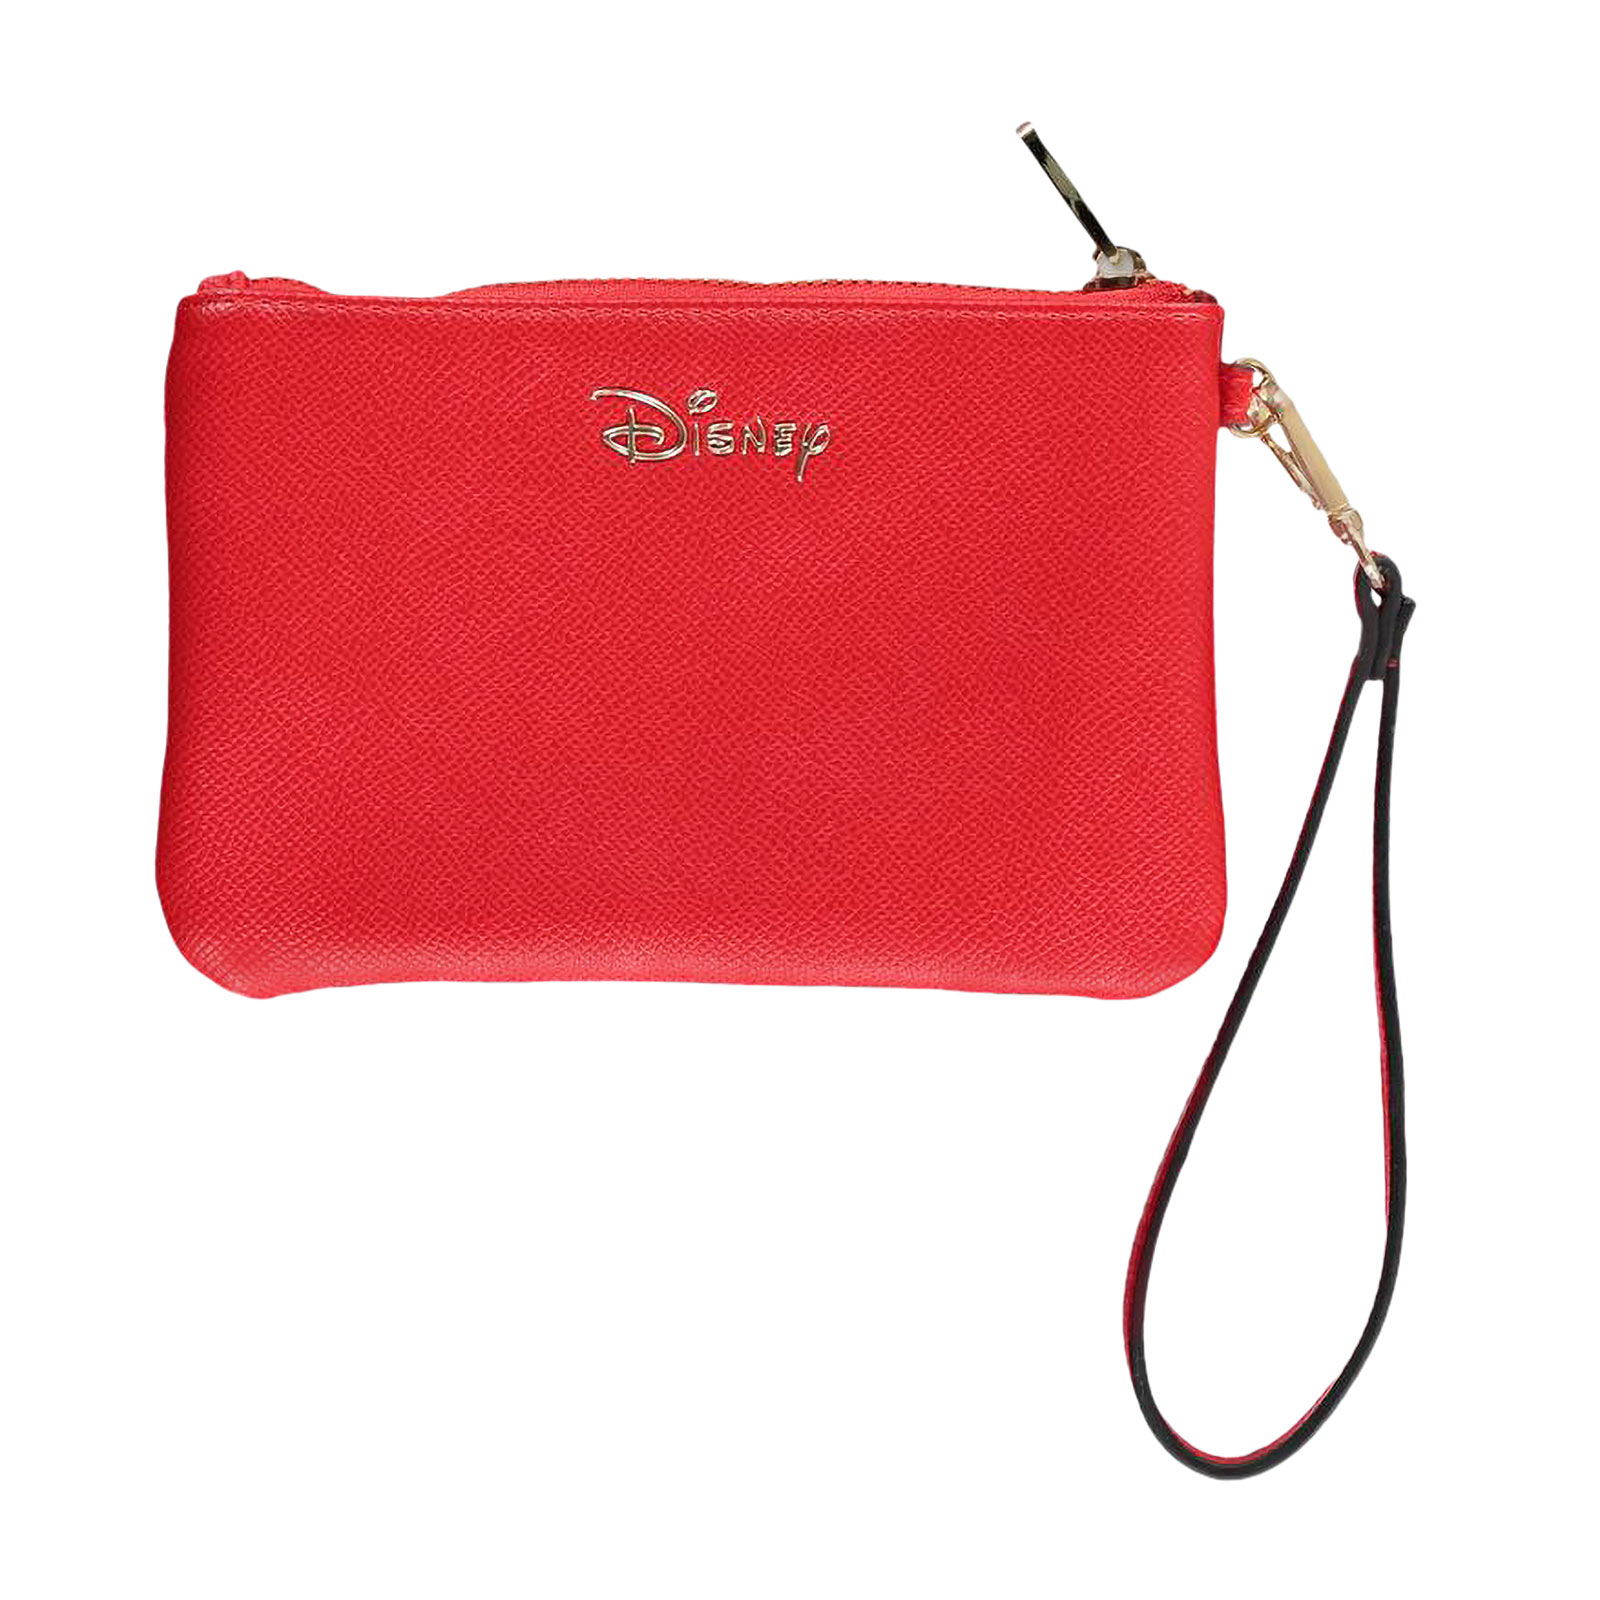 Snow White cosmetic bag red